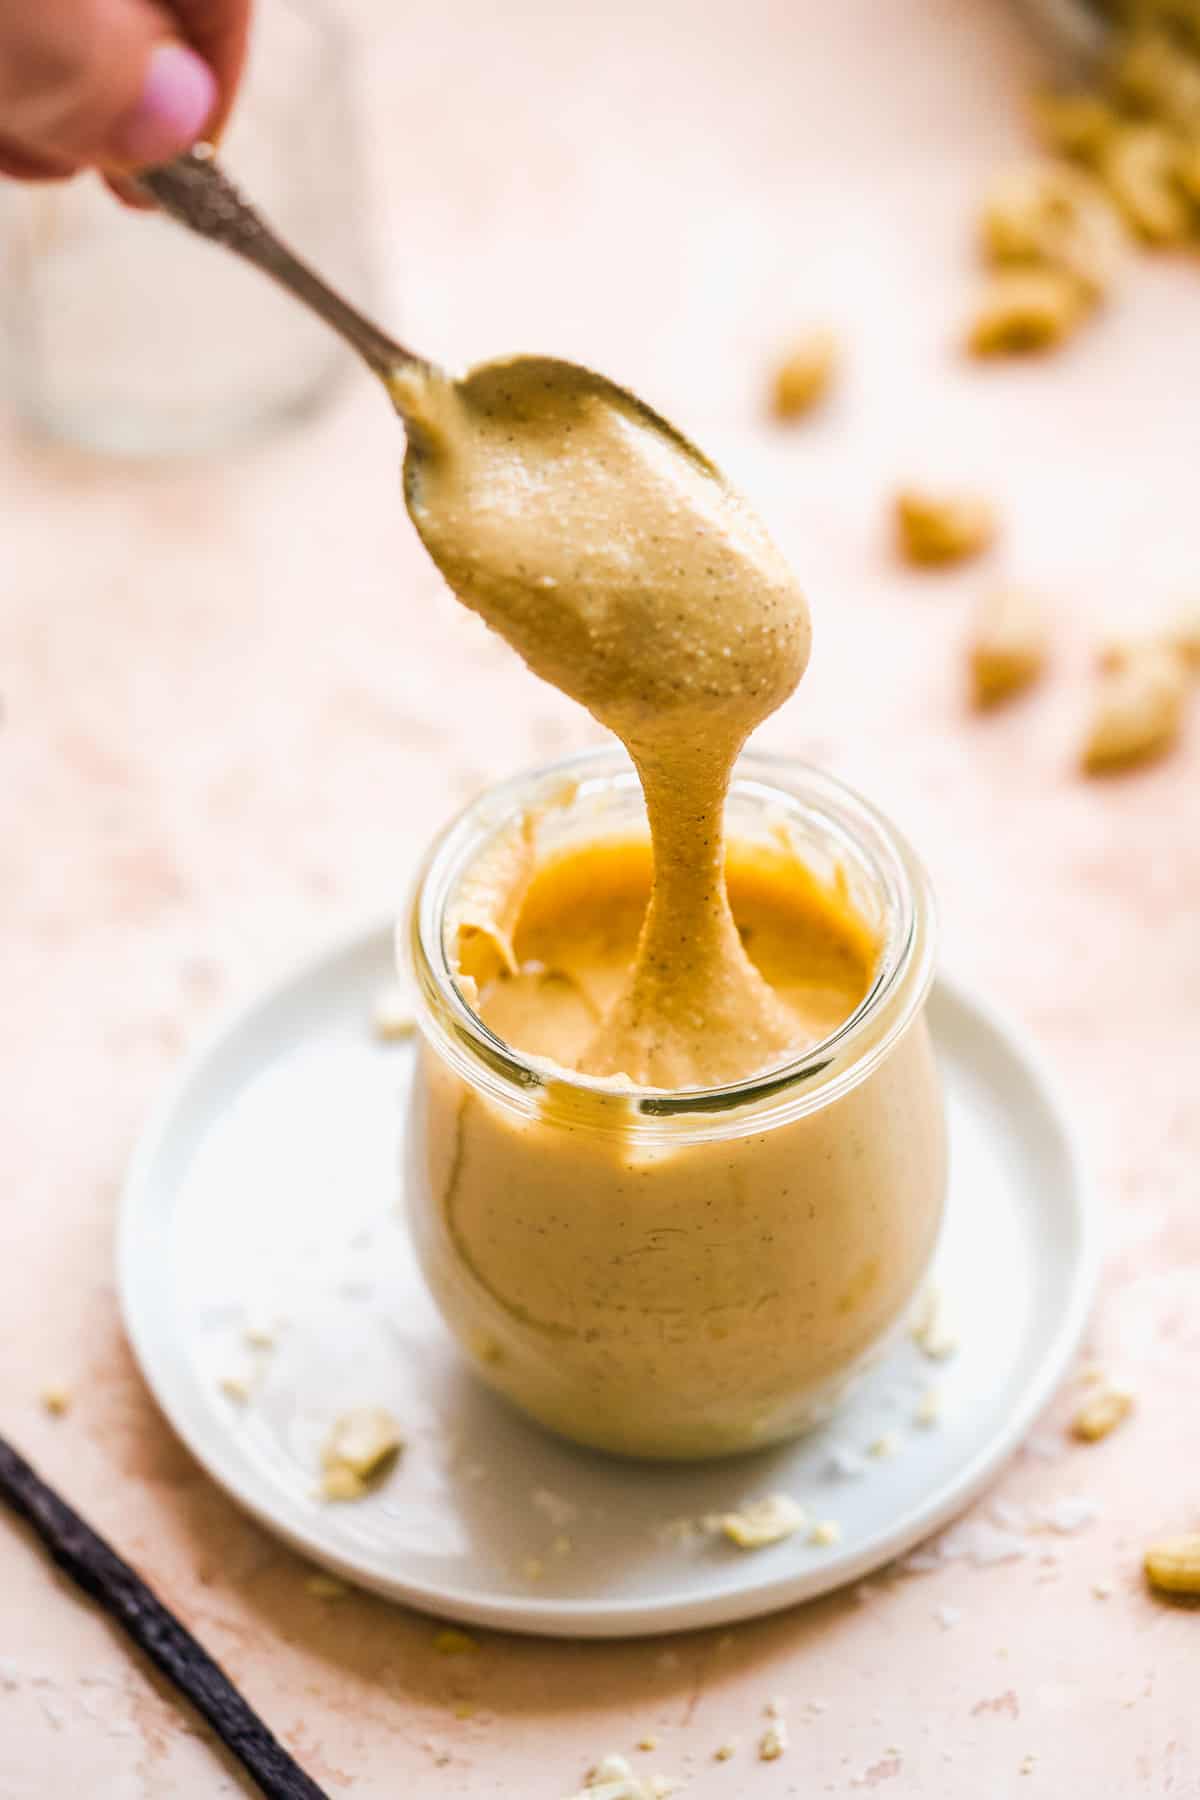 Hand dipping spoon in jar of cashew butter.